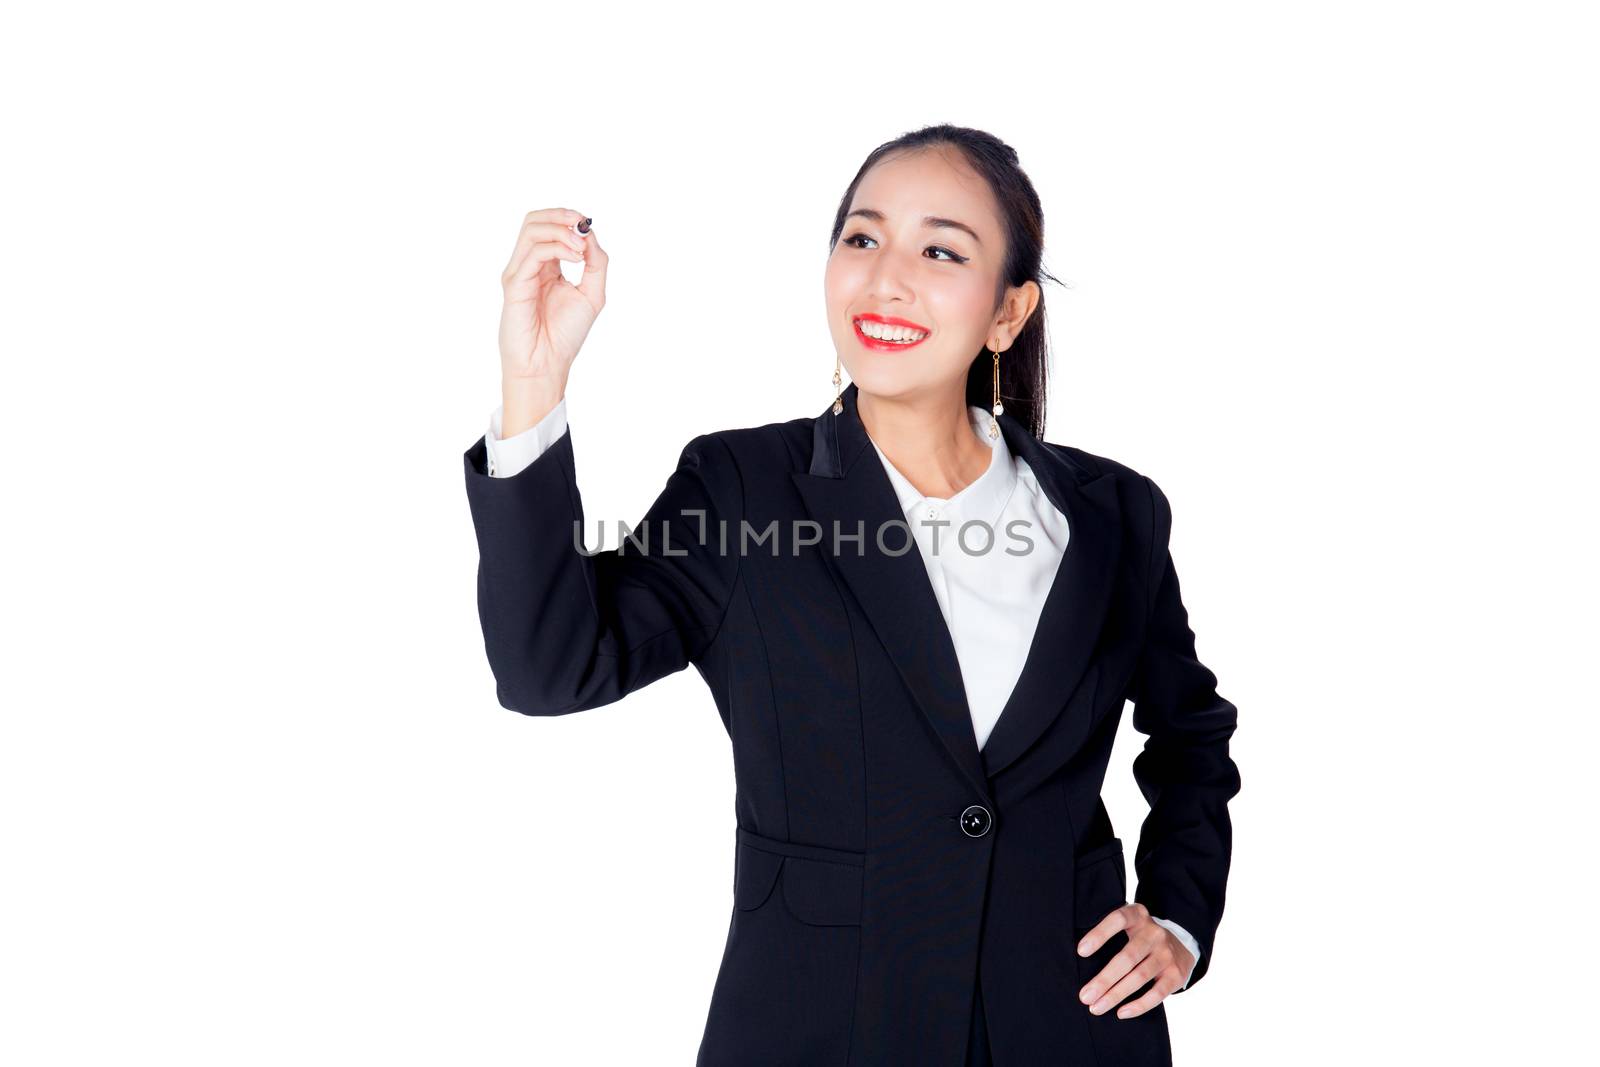 business woman writing on whiteboard with white copyspace